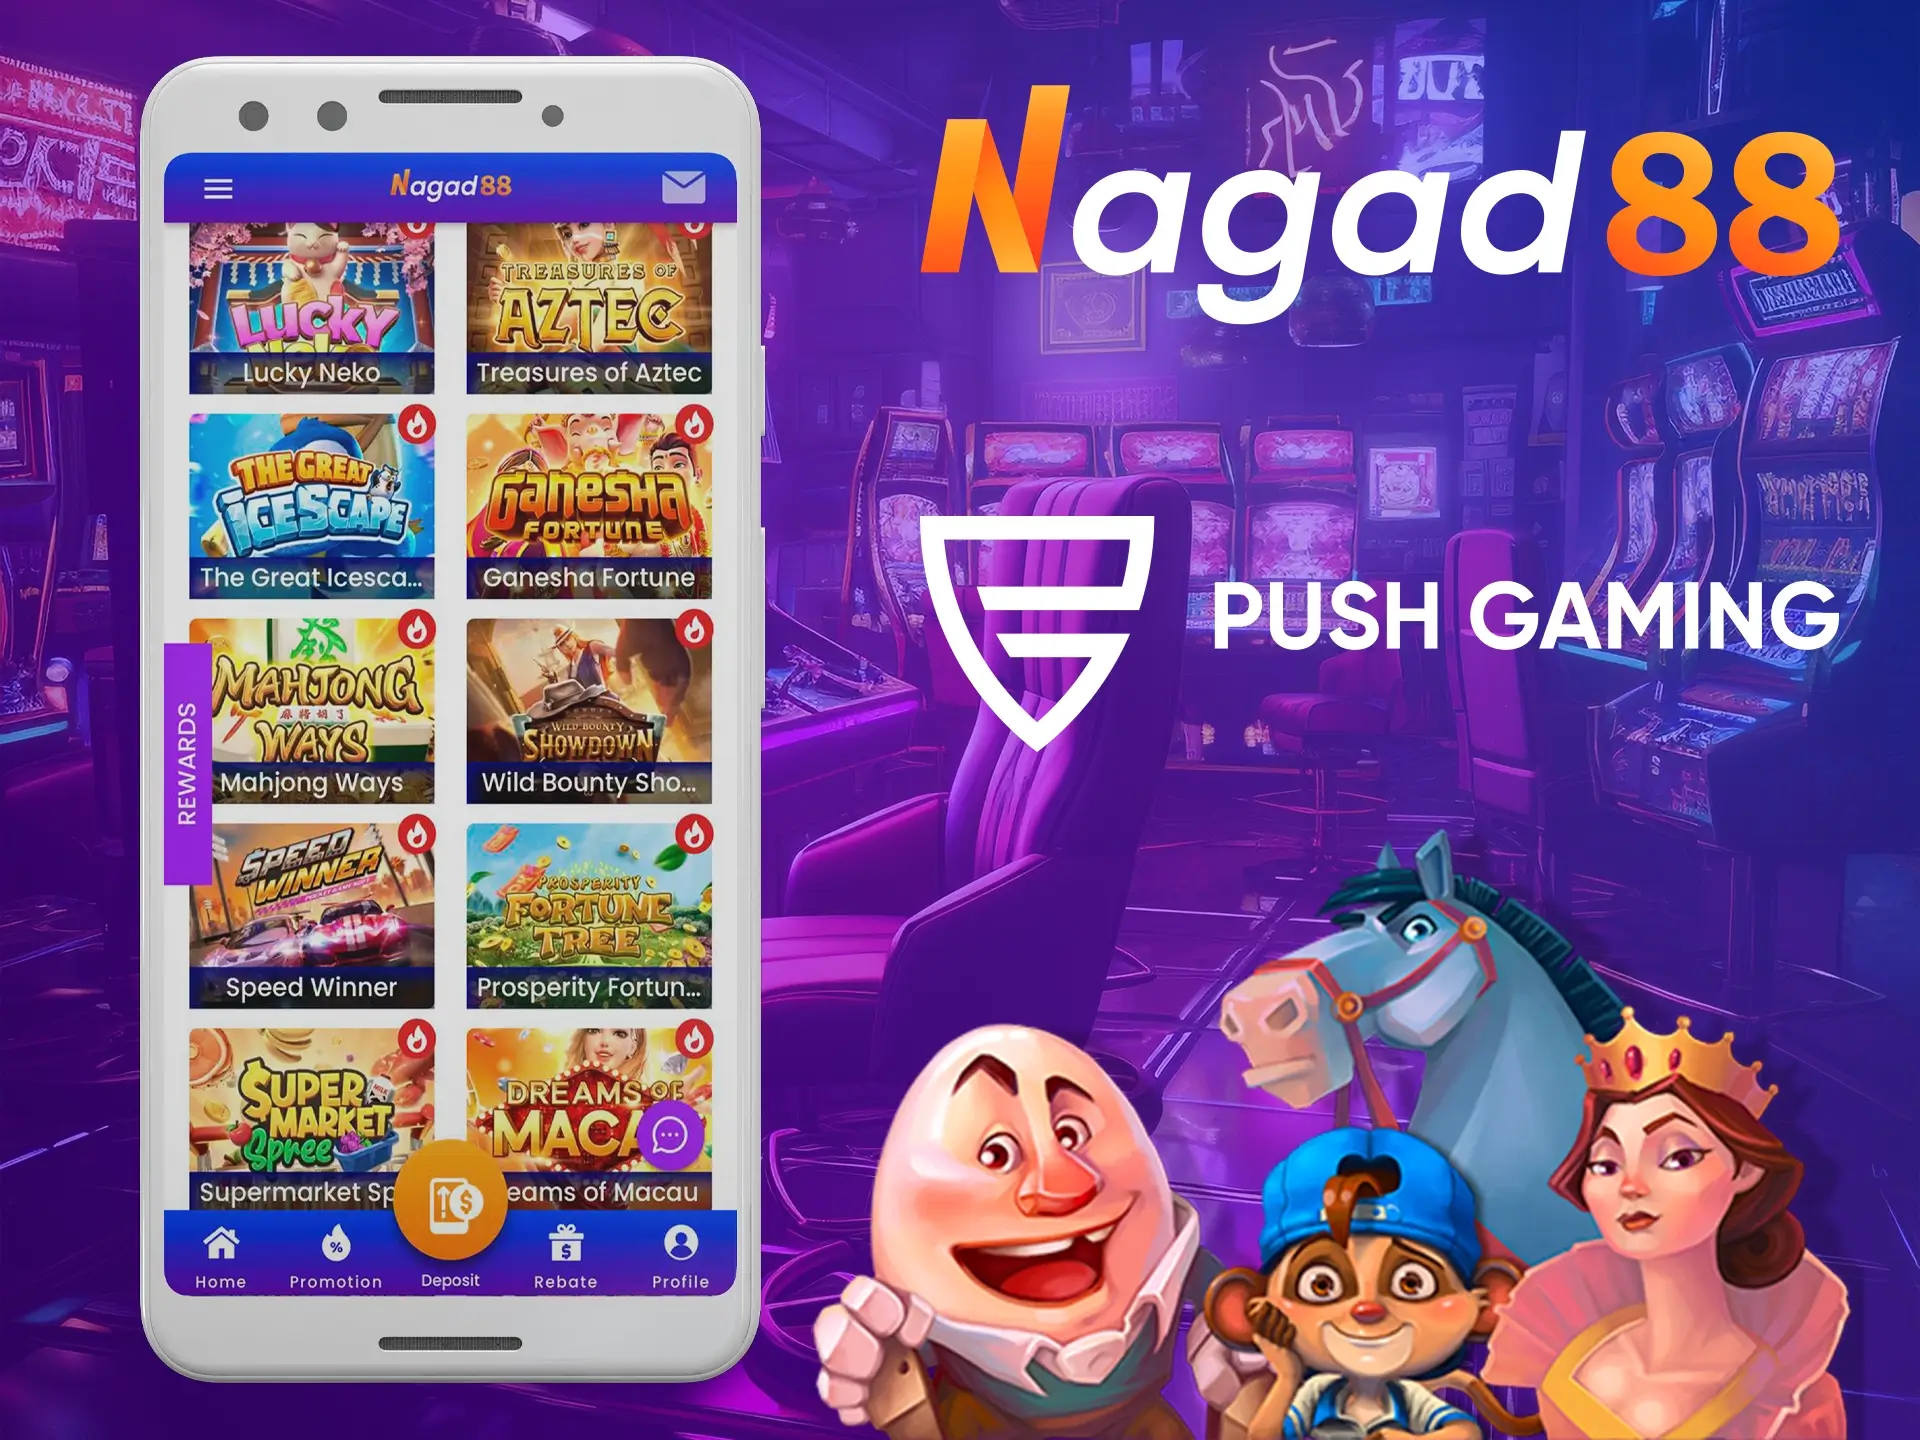 Push gaming is considered one of the best providers at Nagad88 casino.